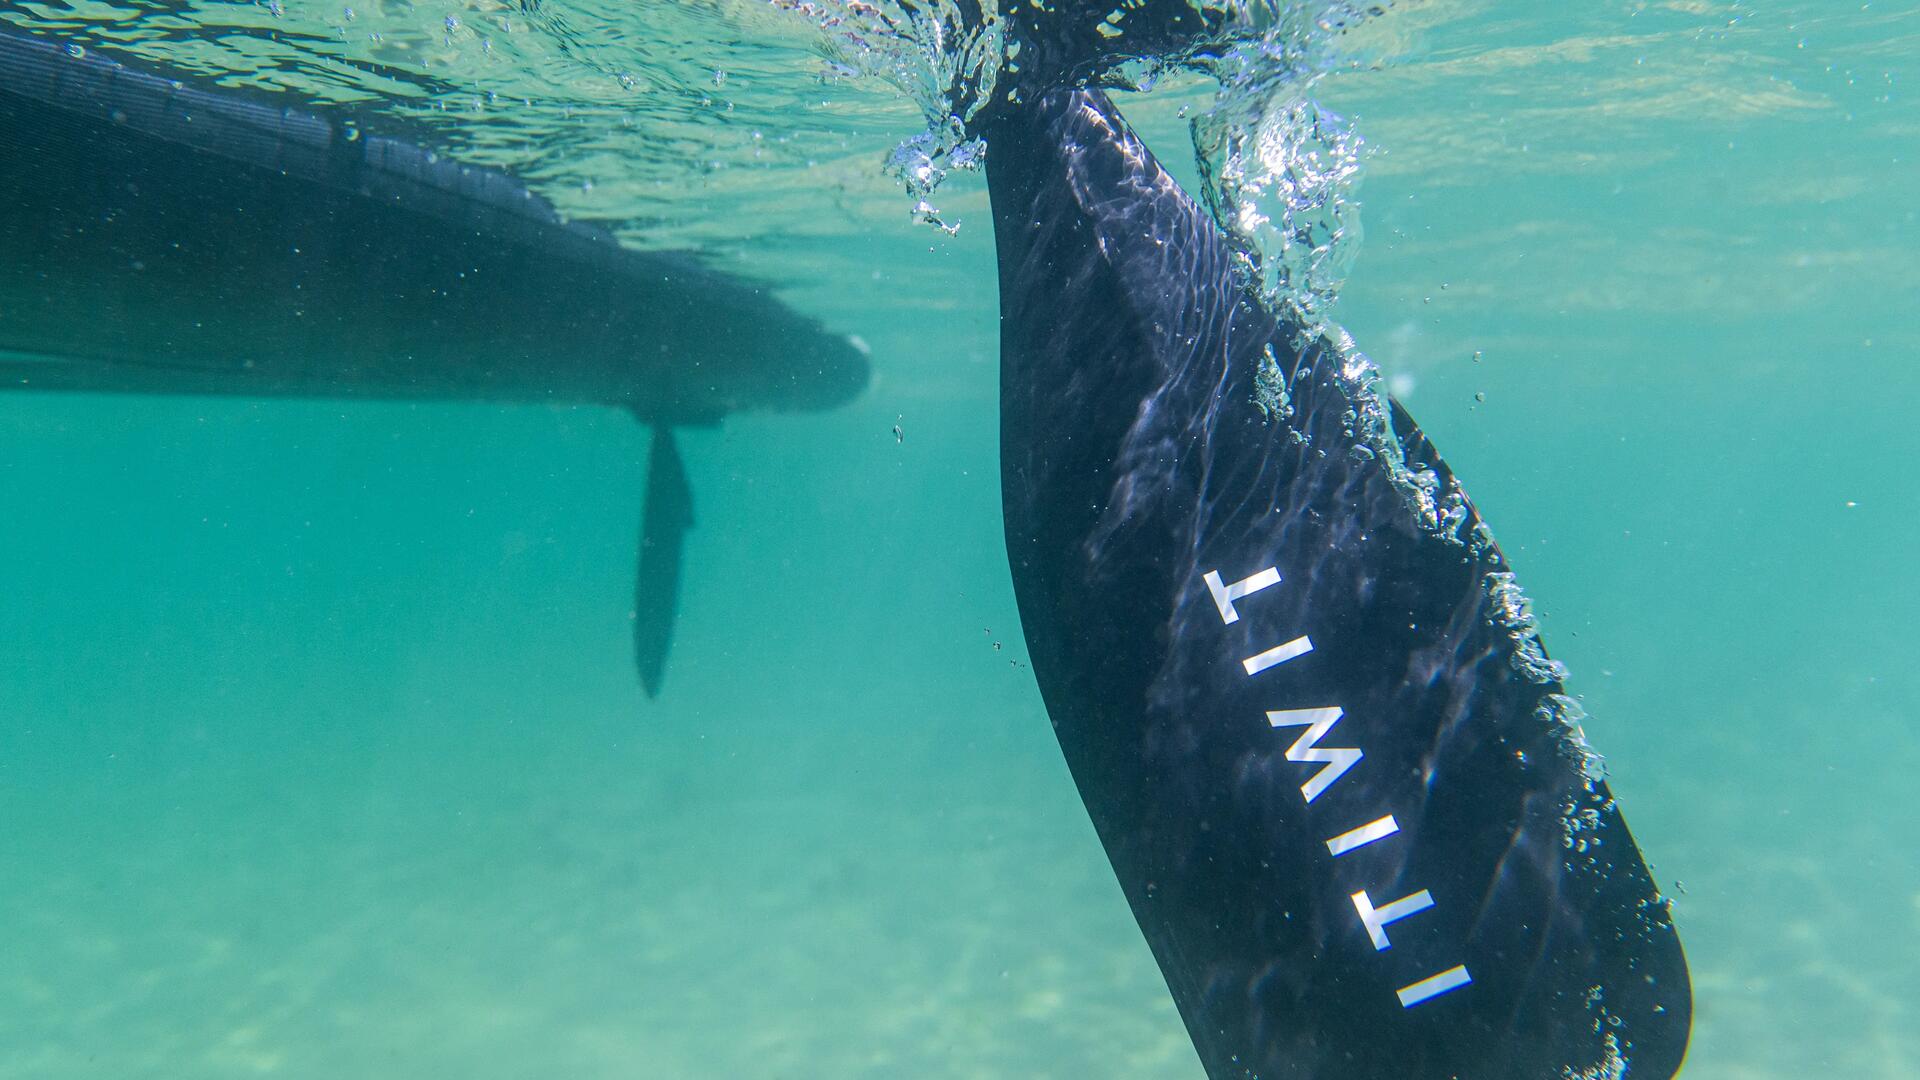 Itiwit paddle entering the water viewed from underwater.